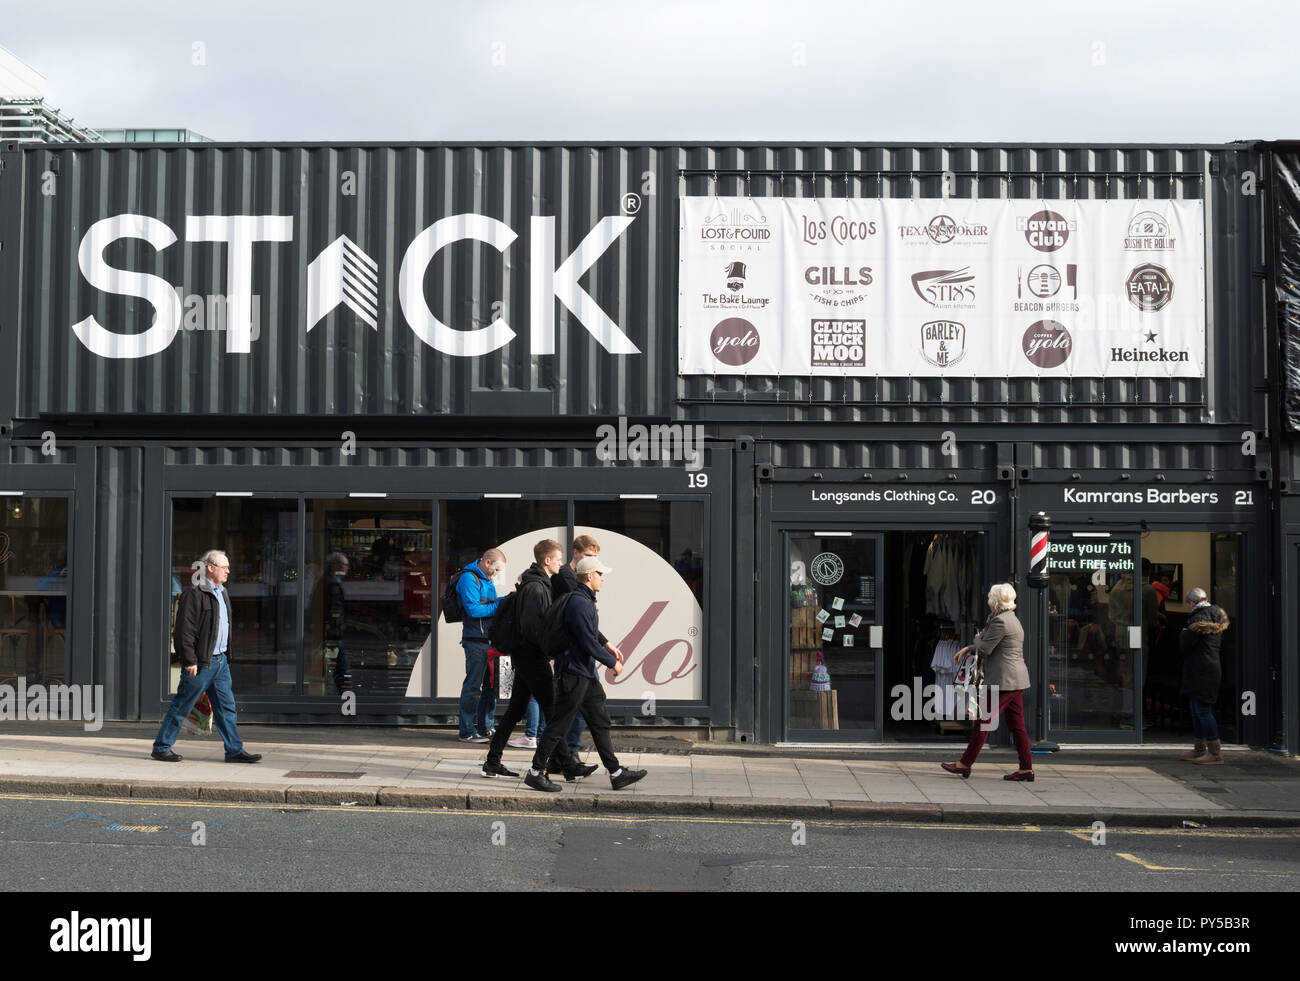 STACK, shipping container social hub or retail village in Newcastle upon Tyne, England, UK Stock Photo